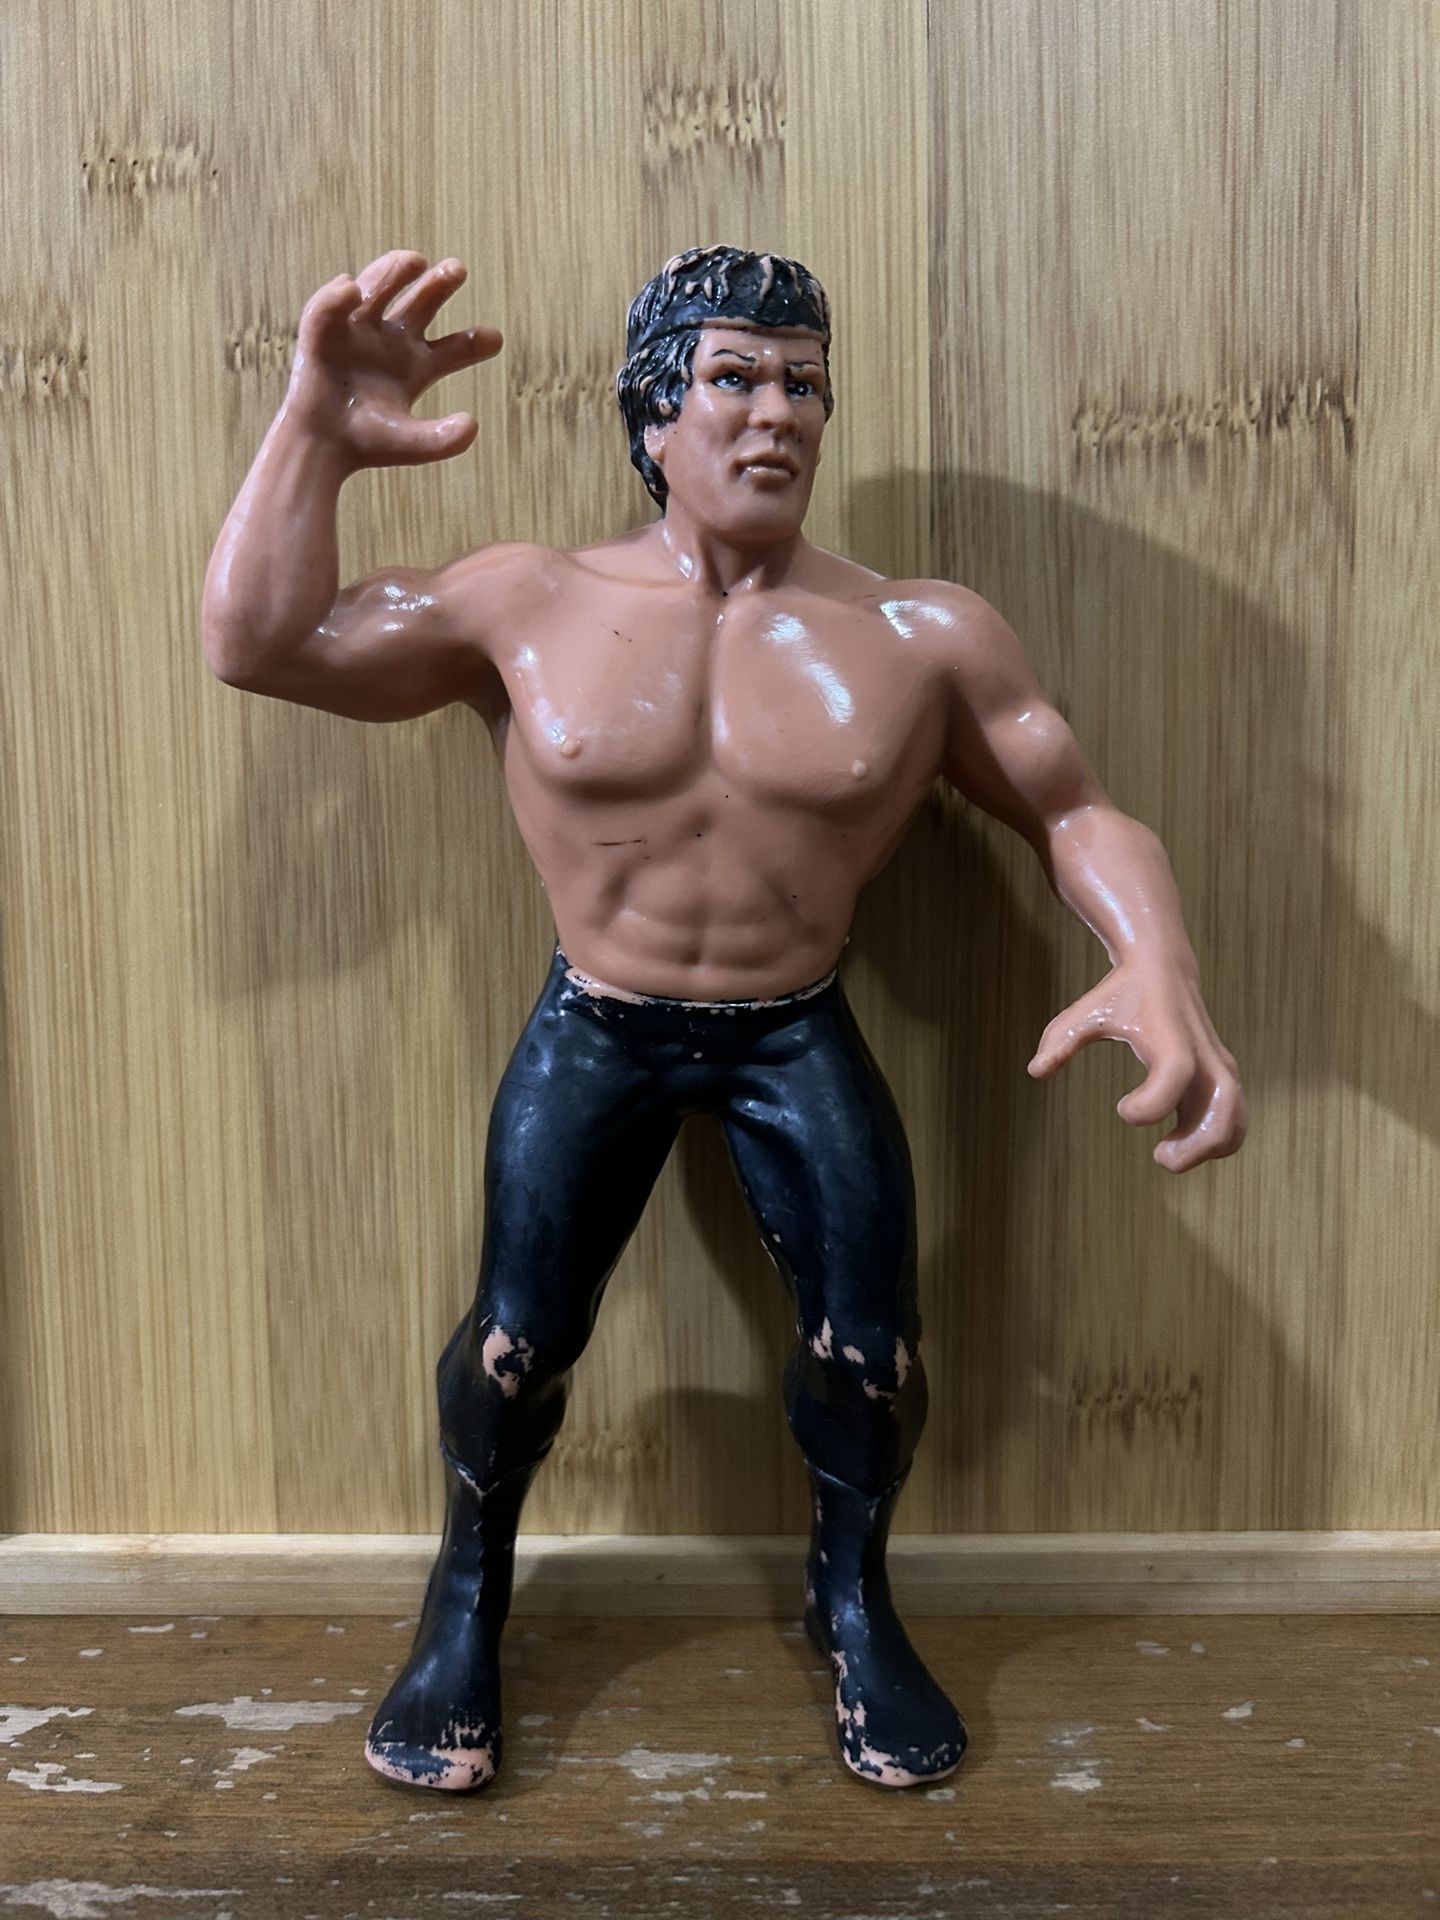 RICKY THE DRAGON STEAMBOAT LJN Action Figure 